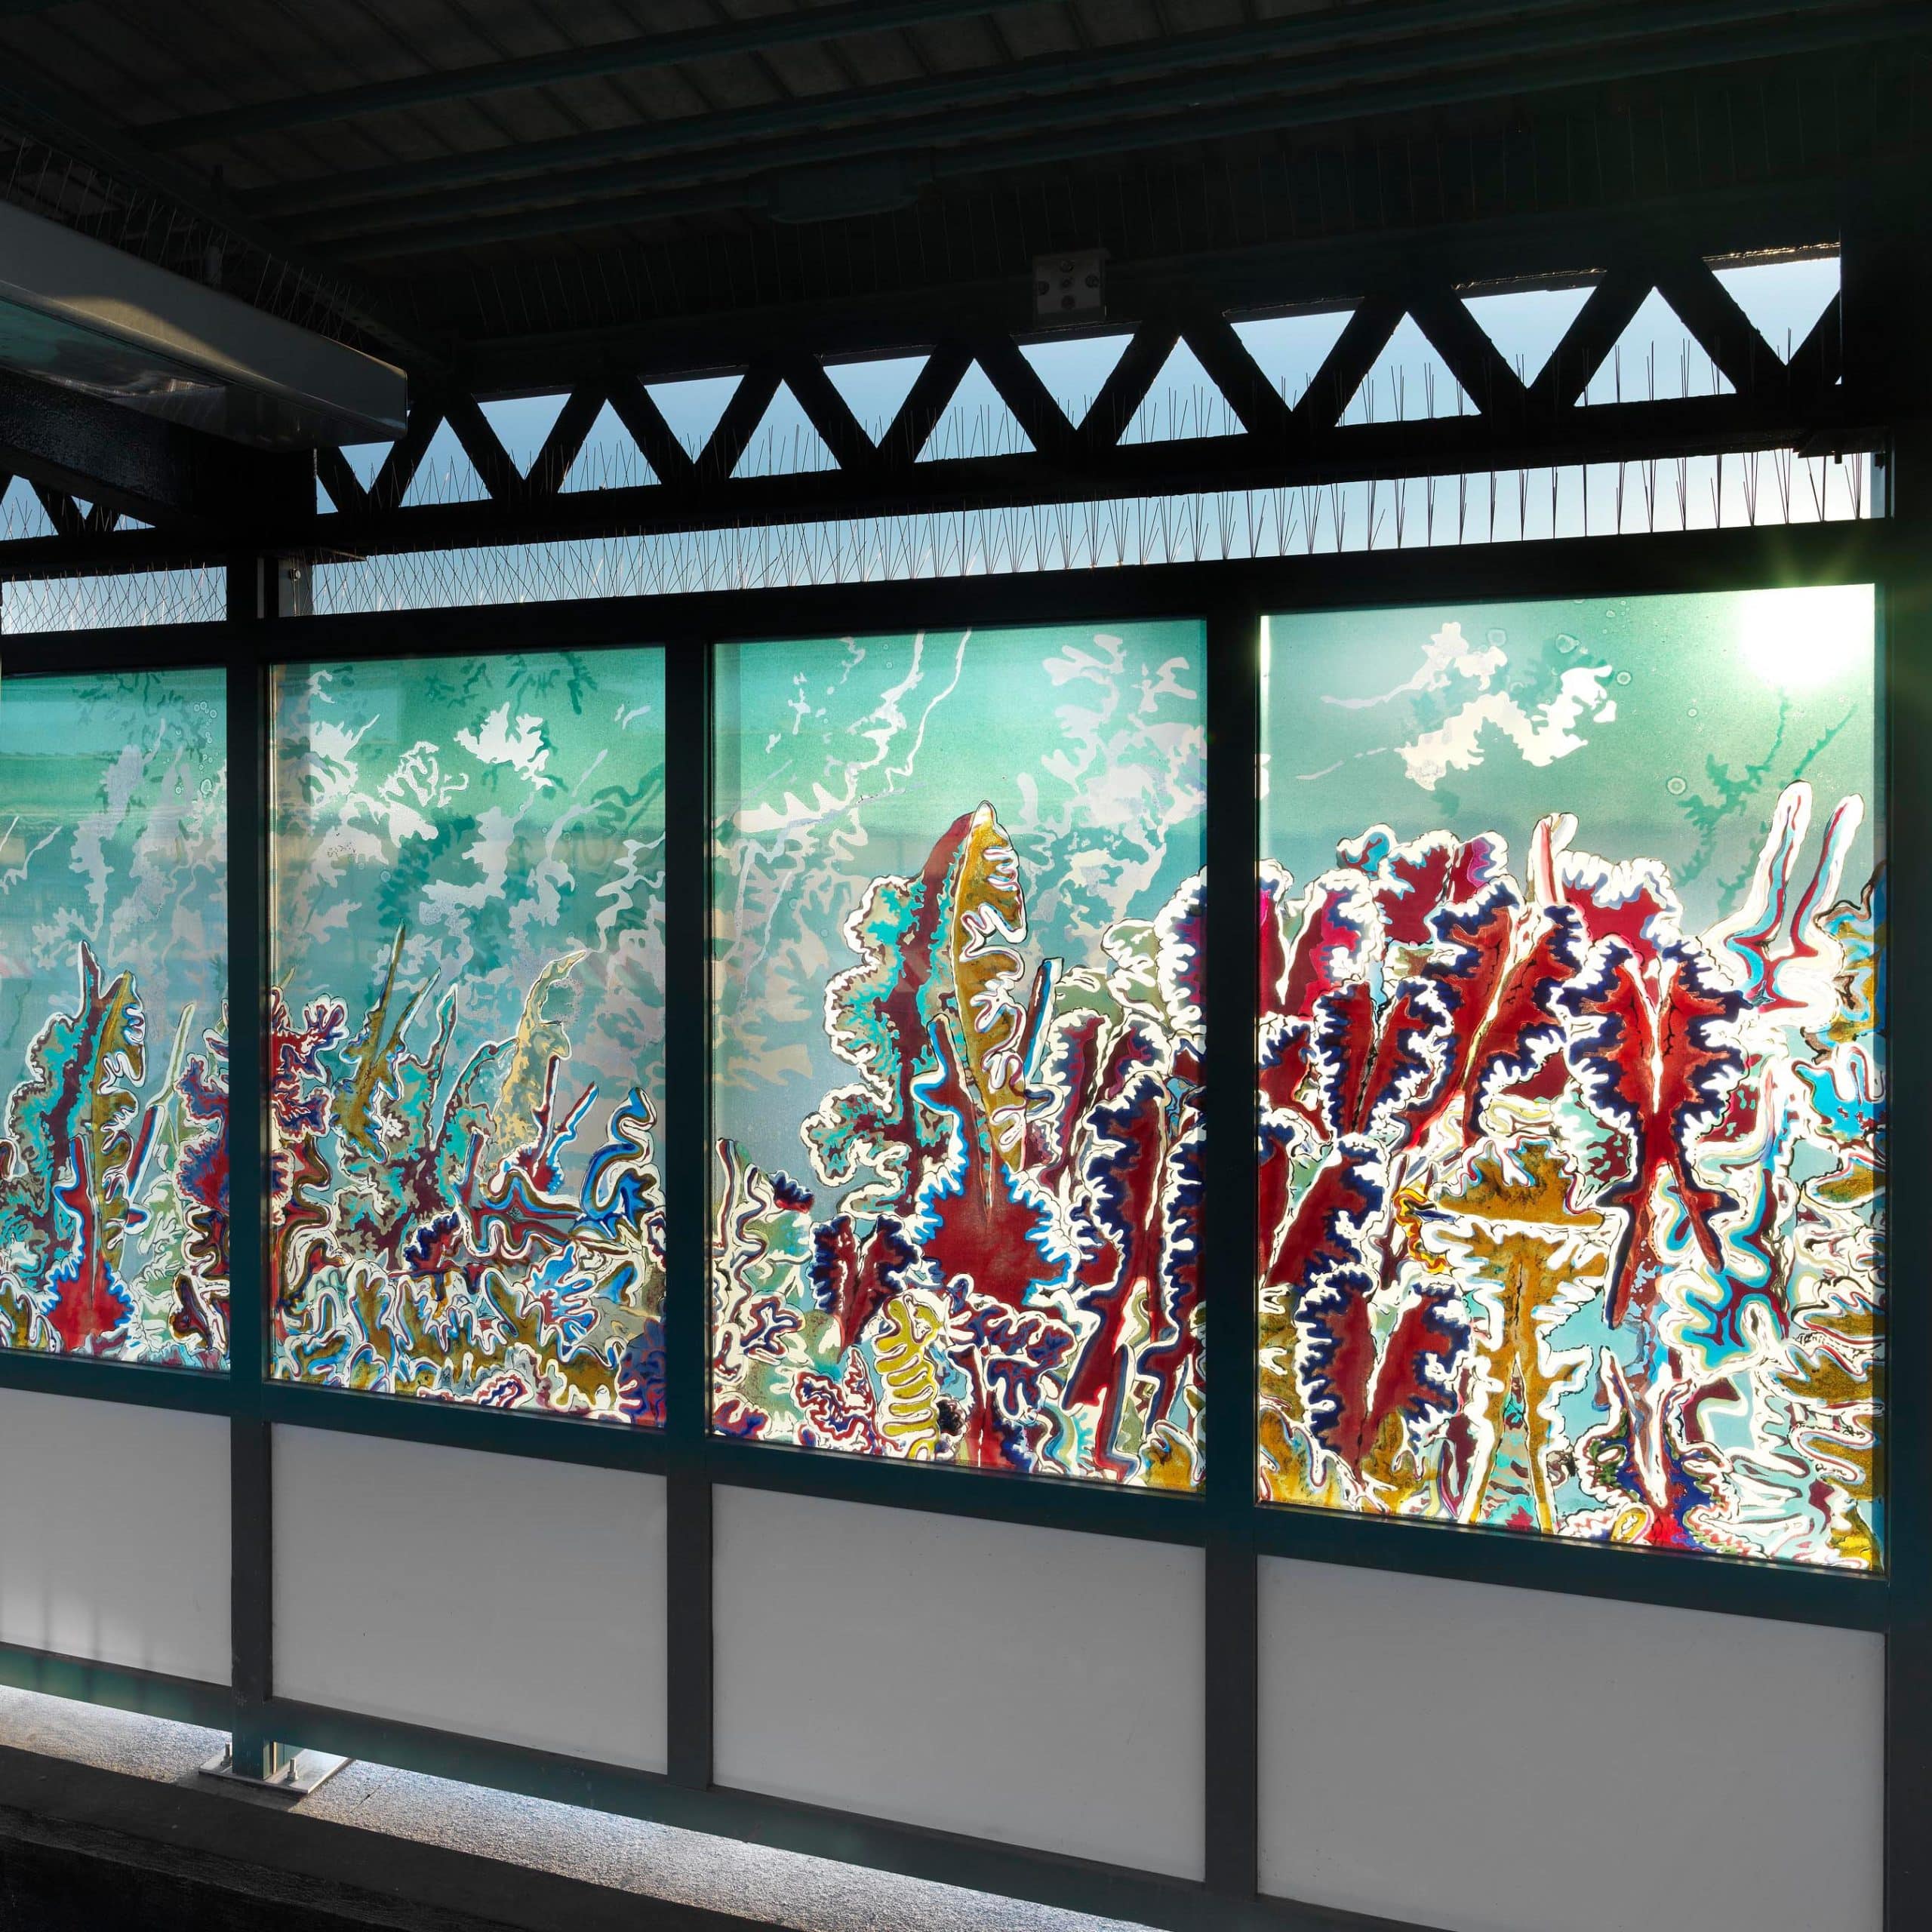 Colorful artistic glass panel windows in a train station with abstract patterns depicting coral reefs.